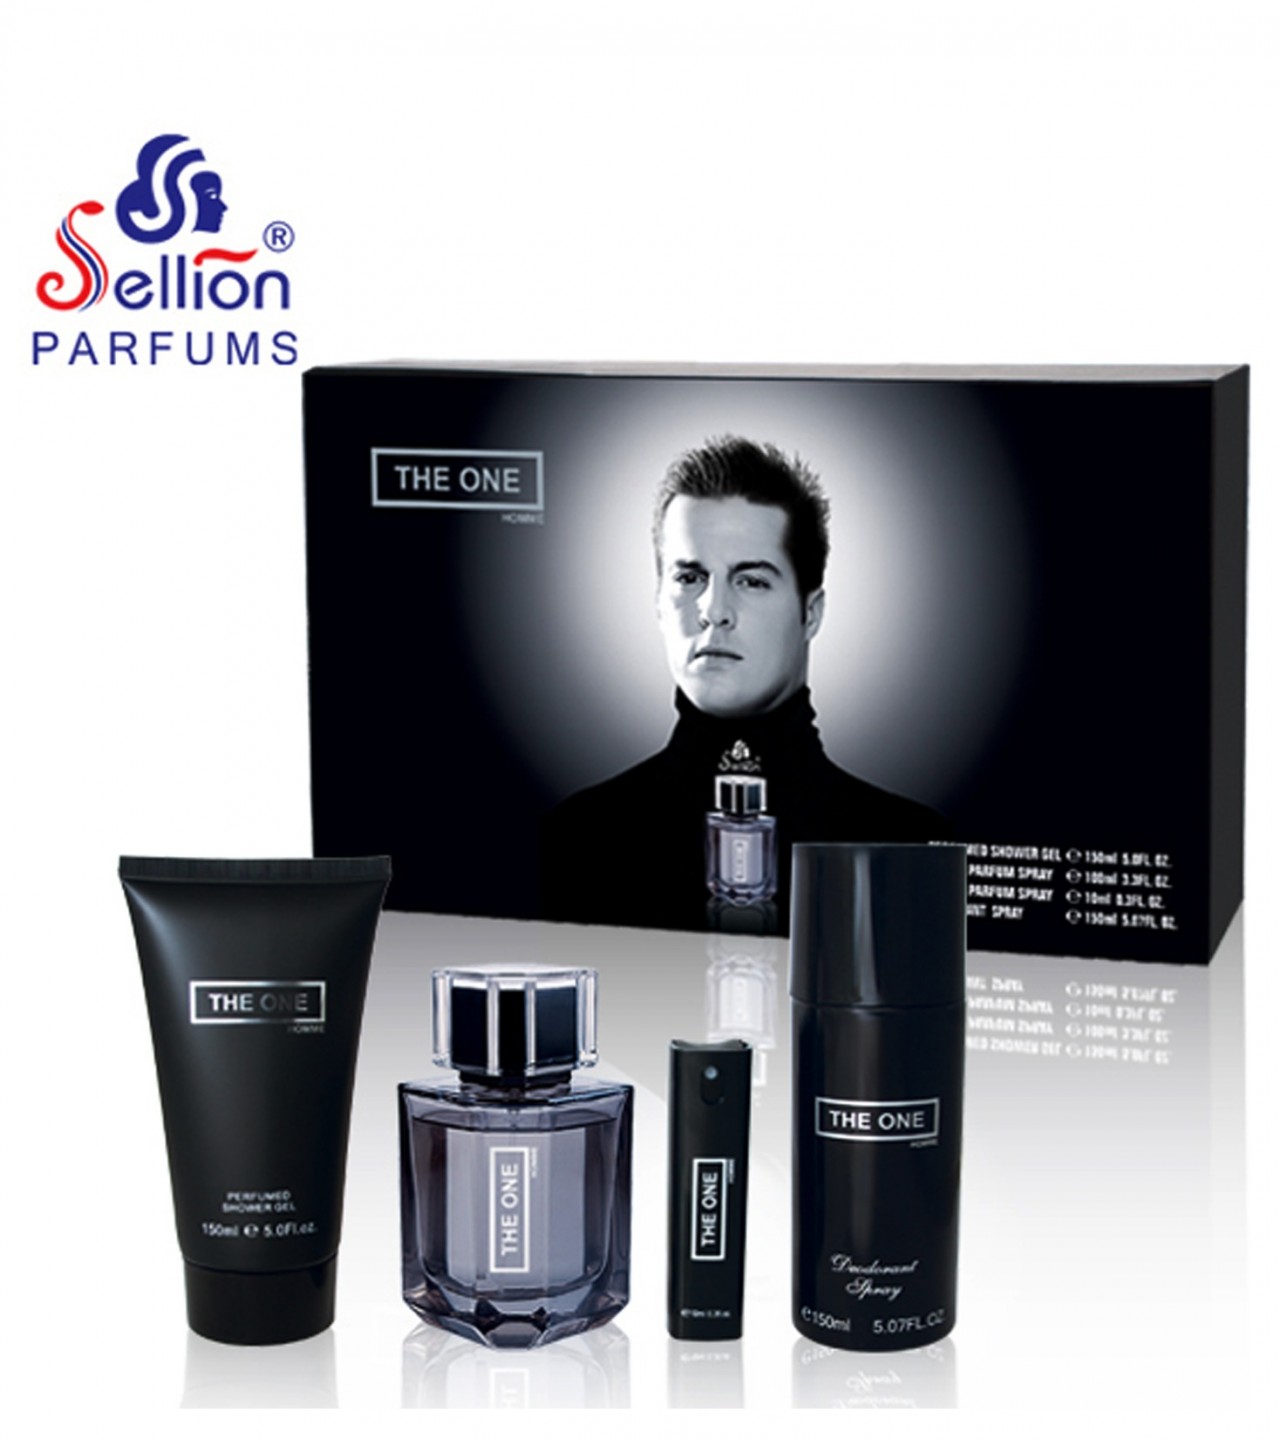 Sellion The One Perfume Gift Set For Men – 4 in 1